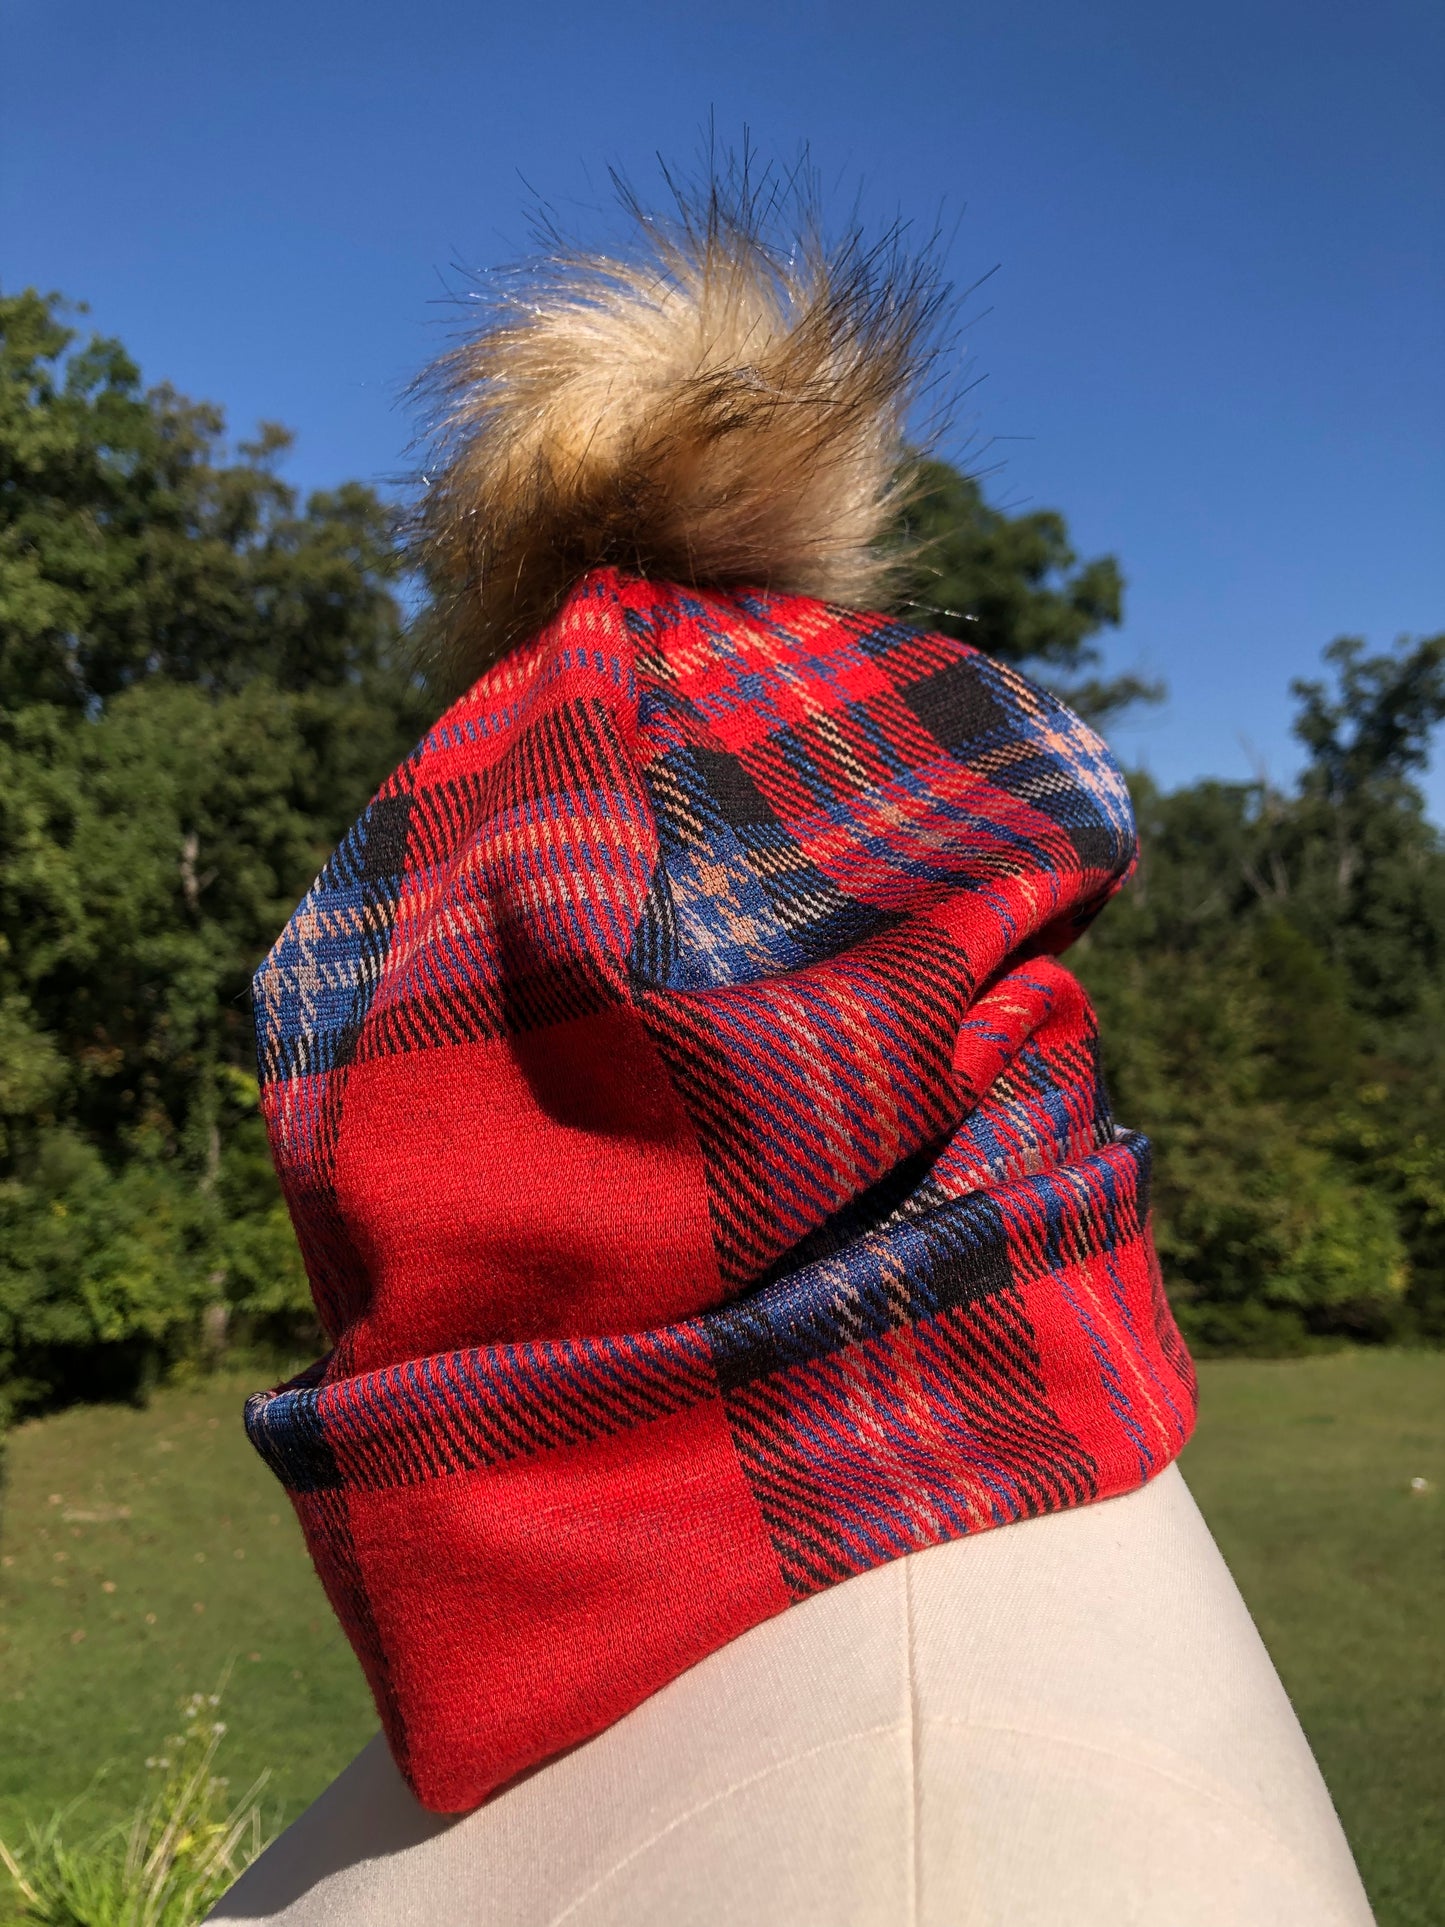 Red, Blue and Black Plaid Winter Beanie With or Without Pom Pom - Limited Stock